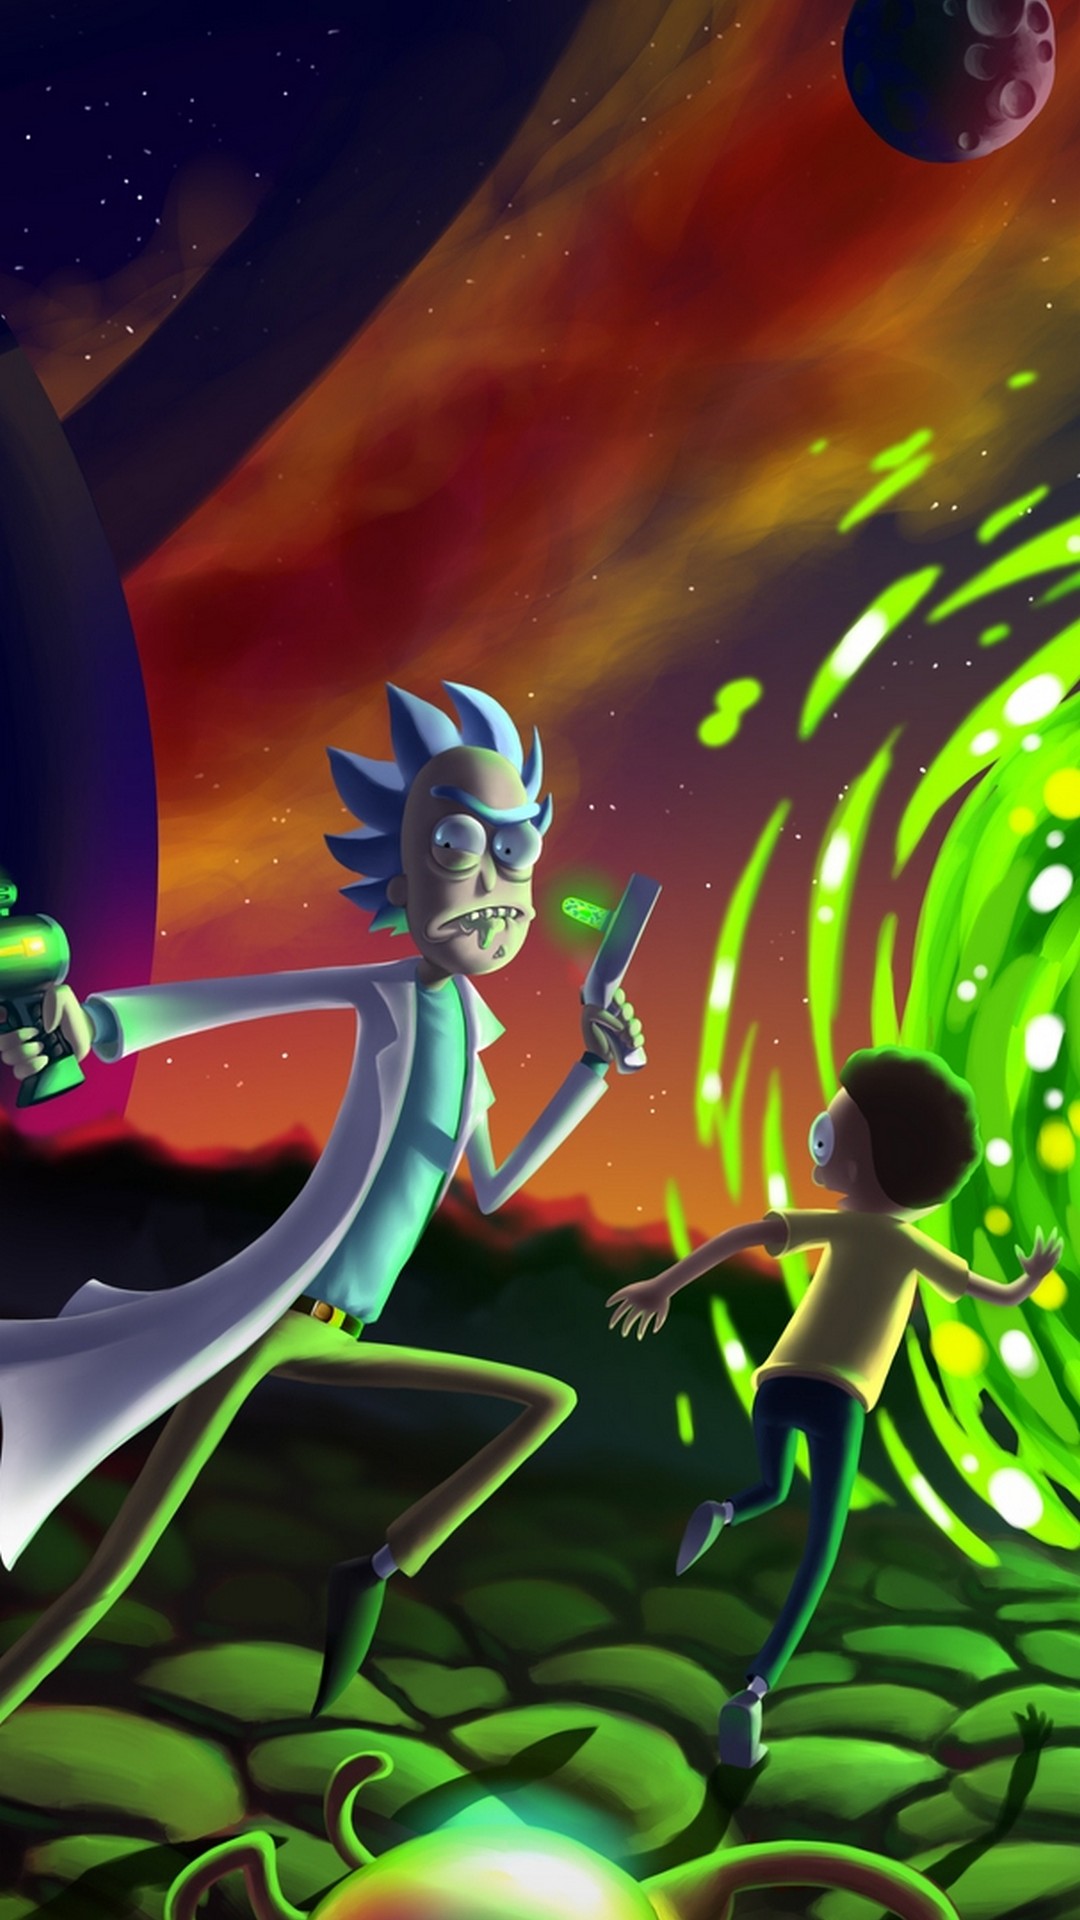 Rick and Morty Android Wallpaper | 2020